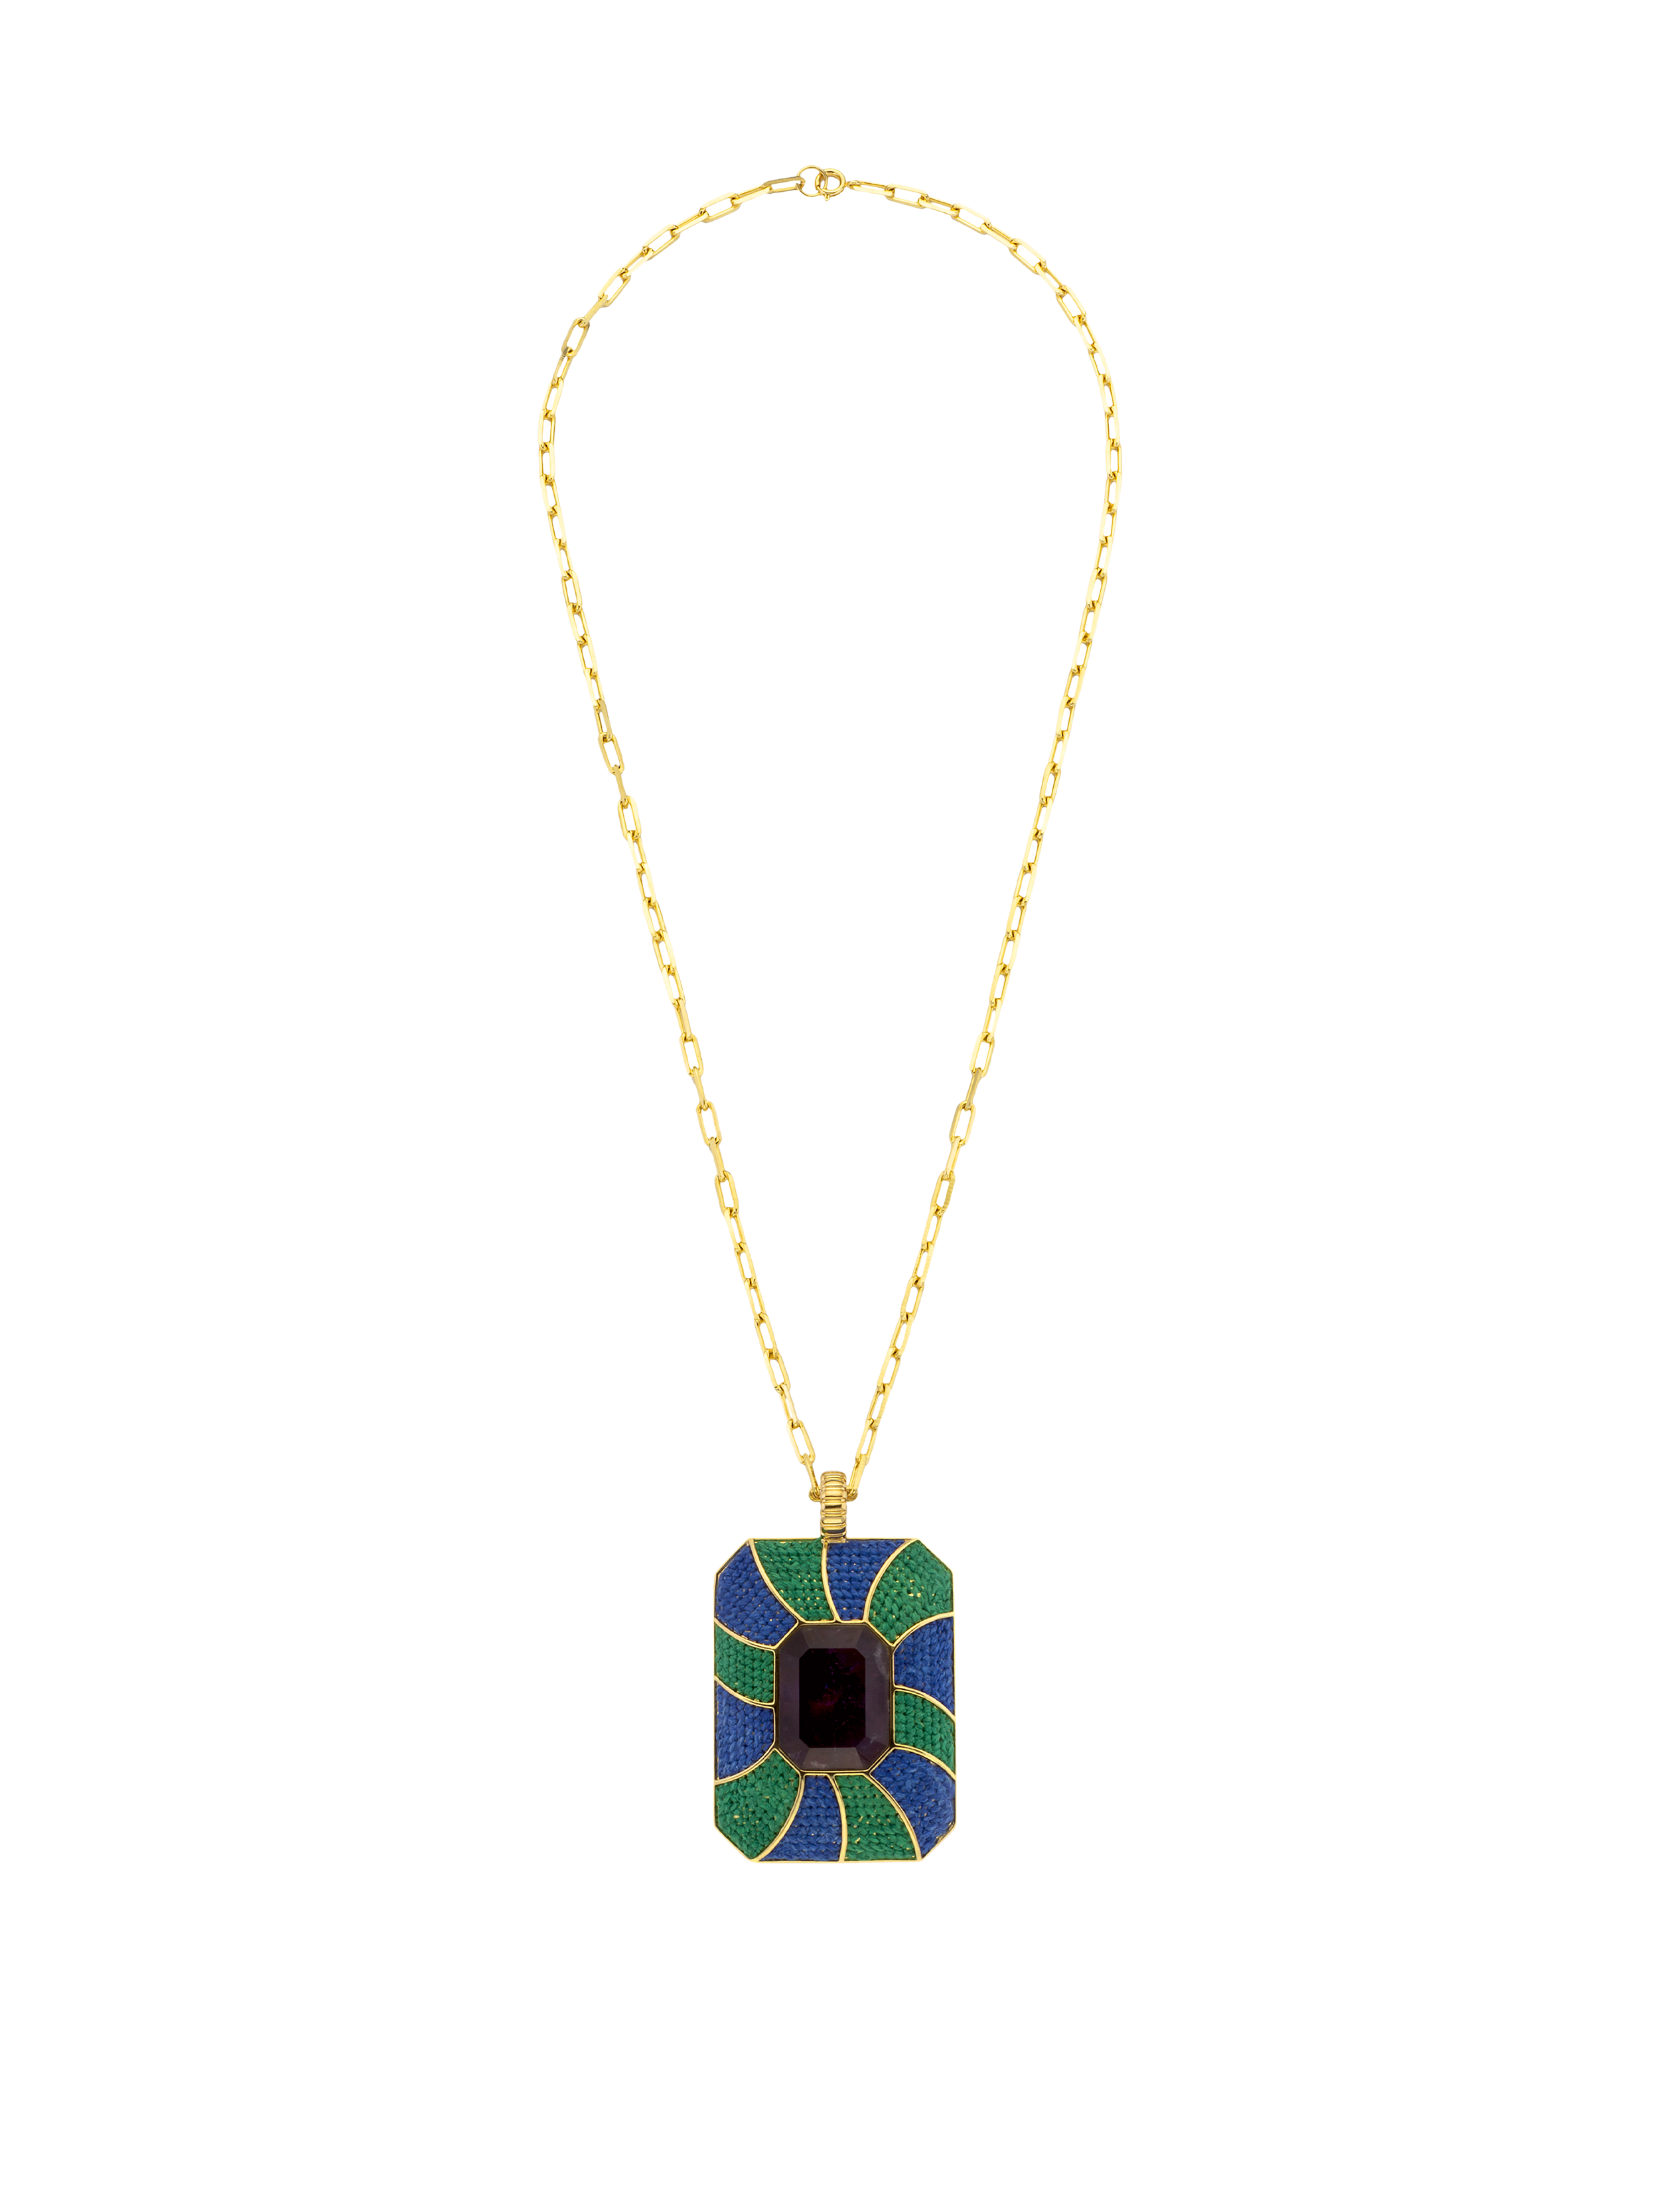 Lolly Necklace - Blue and Green